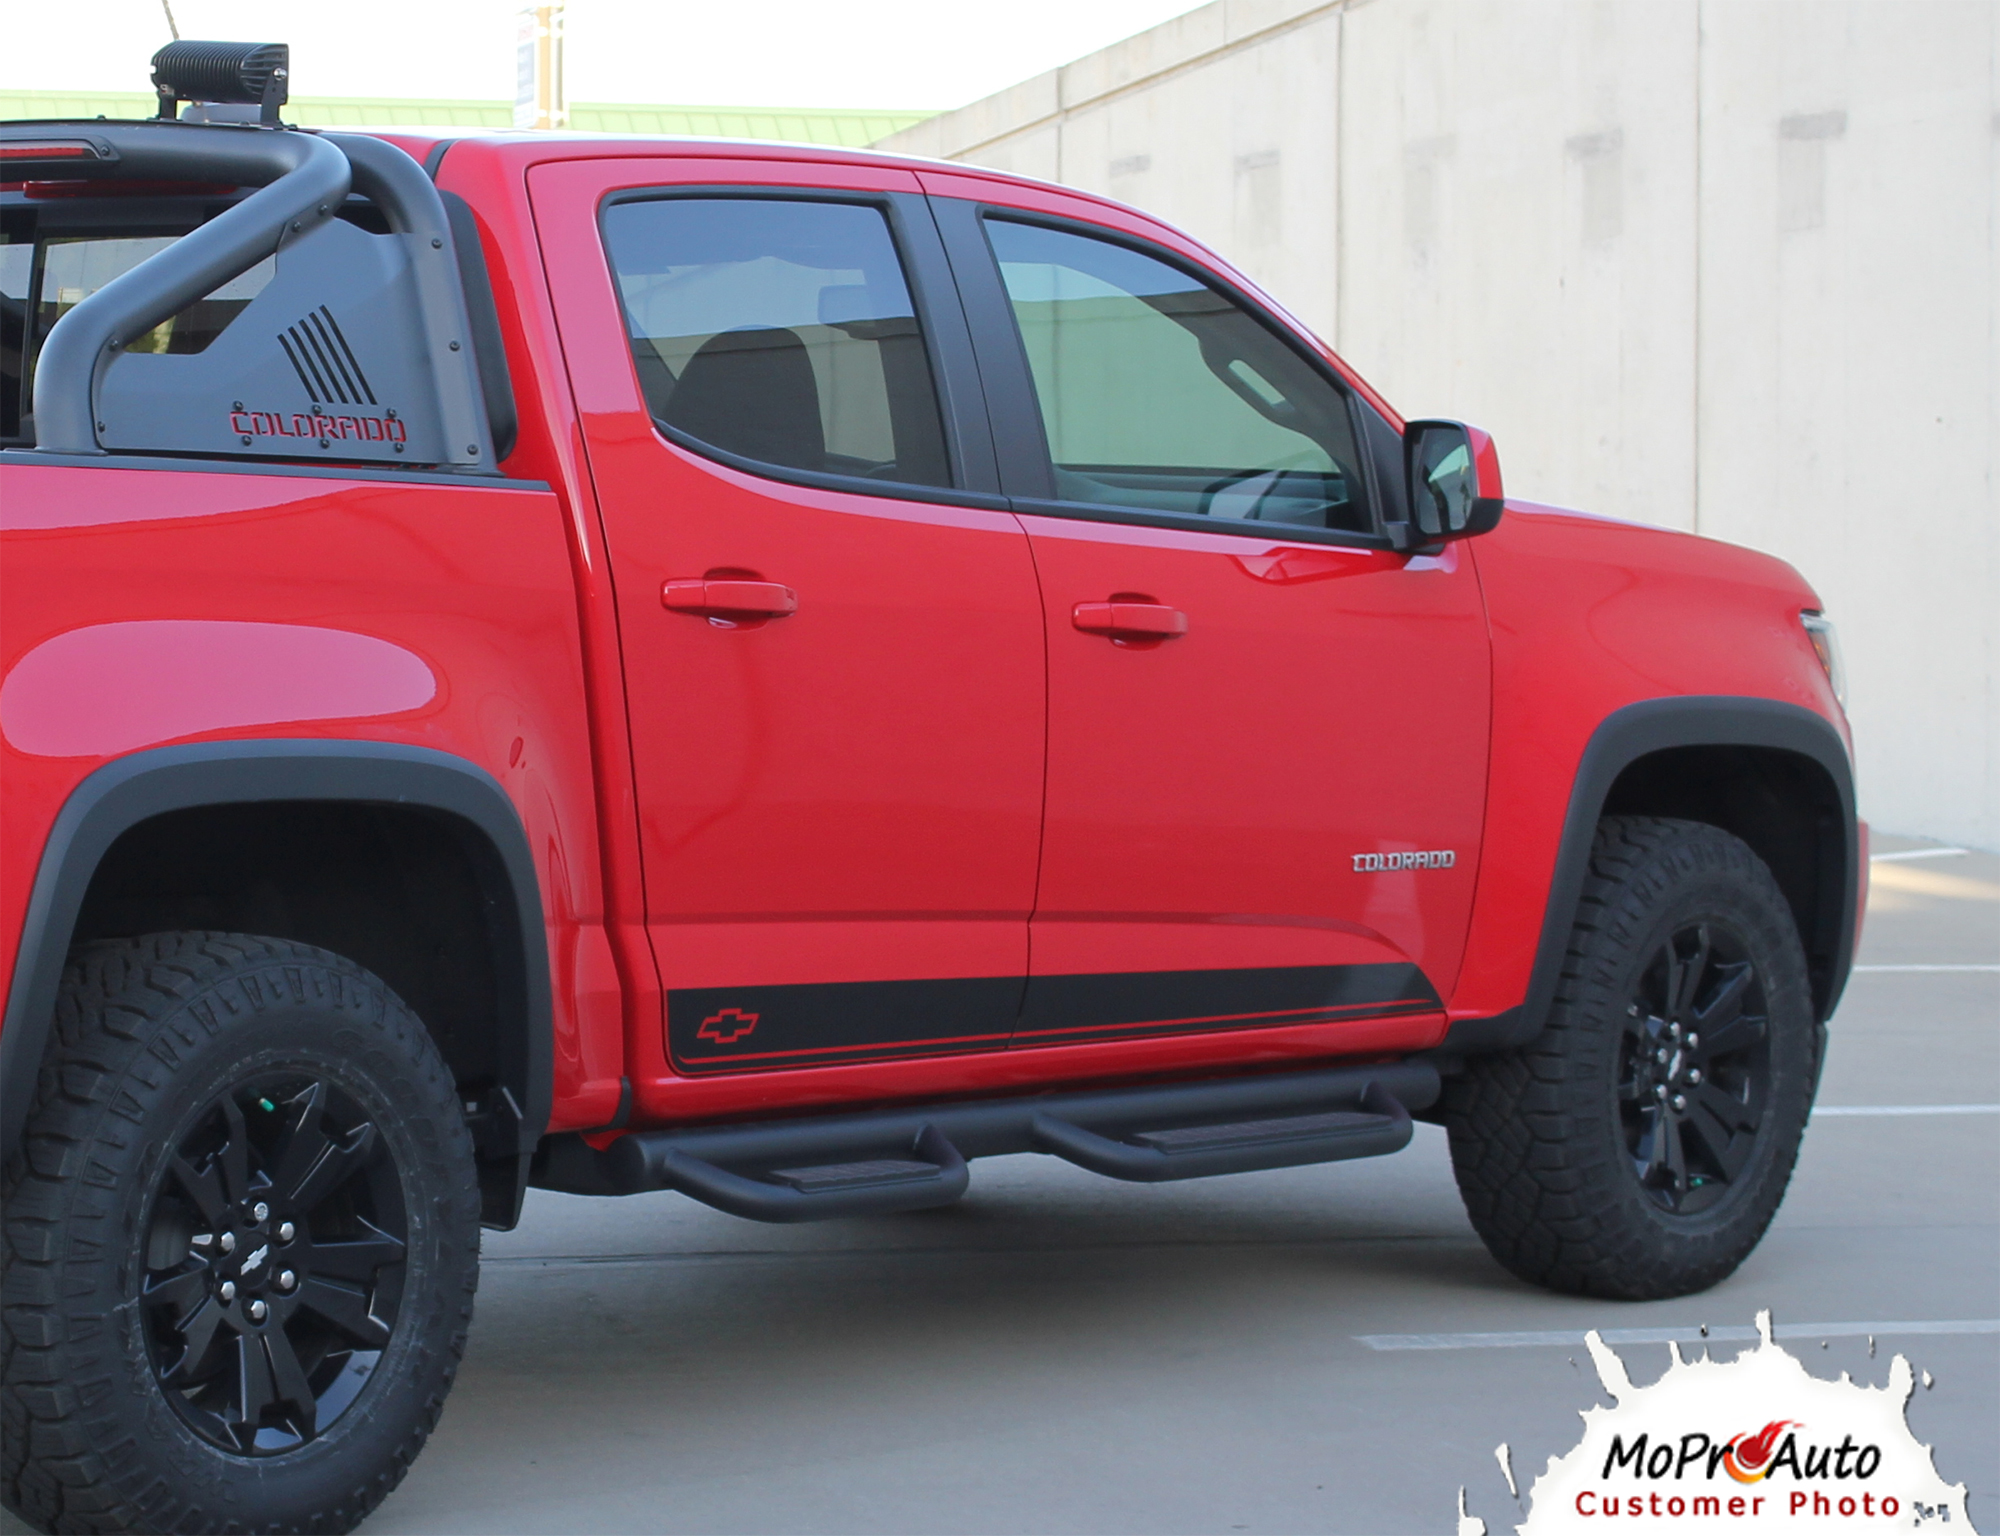 RAMPART - Chevy Colorado Vinyl Graphics, Stripes and Decals Package by MoProAuto Pro Design Series